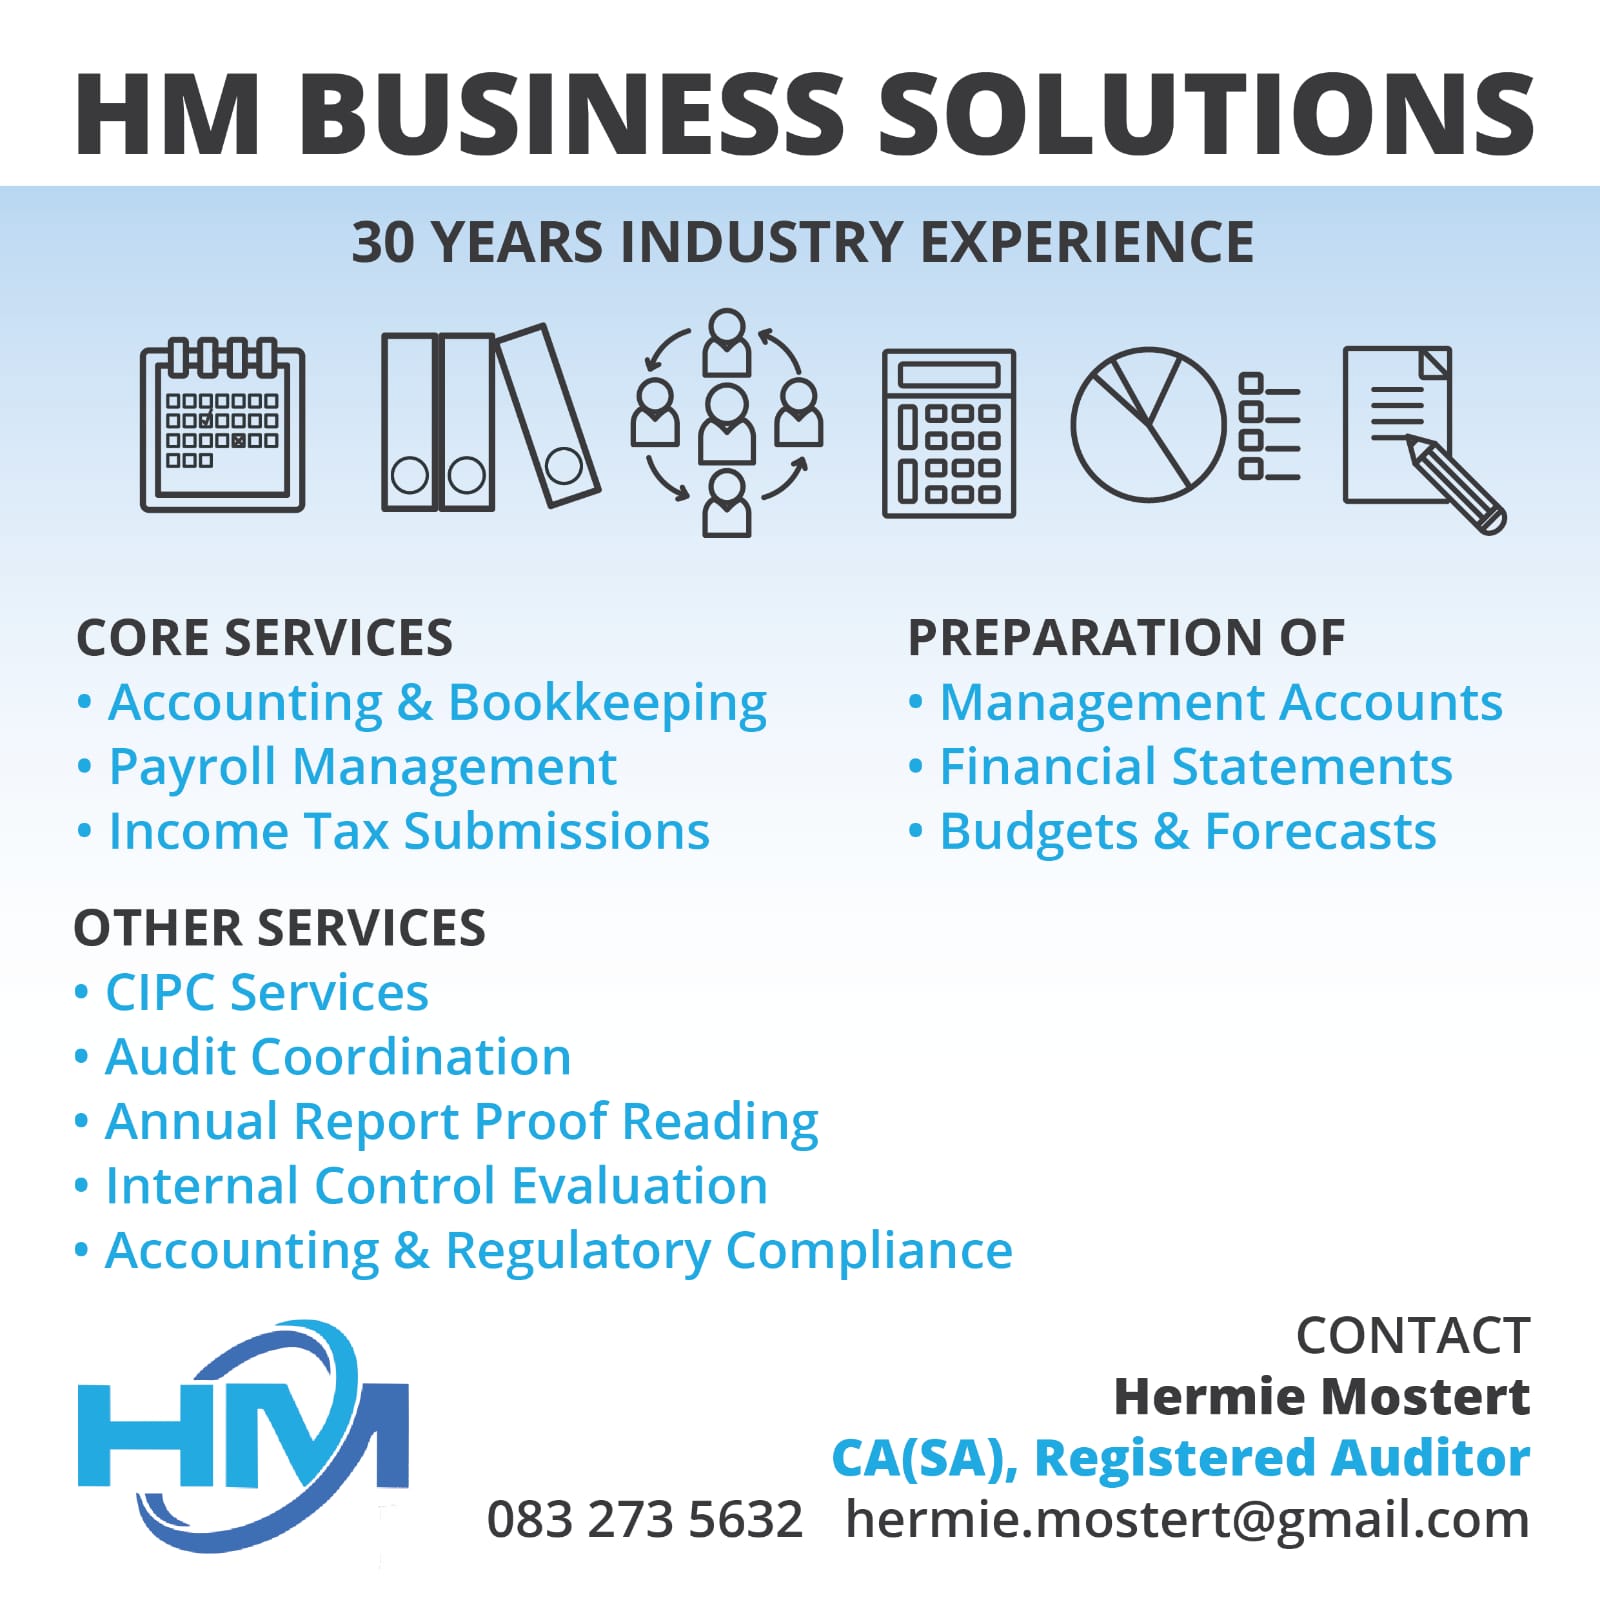 HM Business Solutions